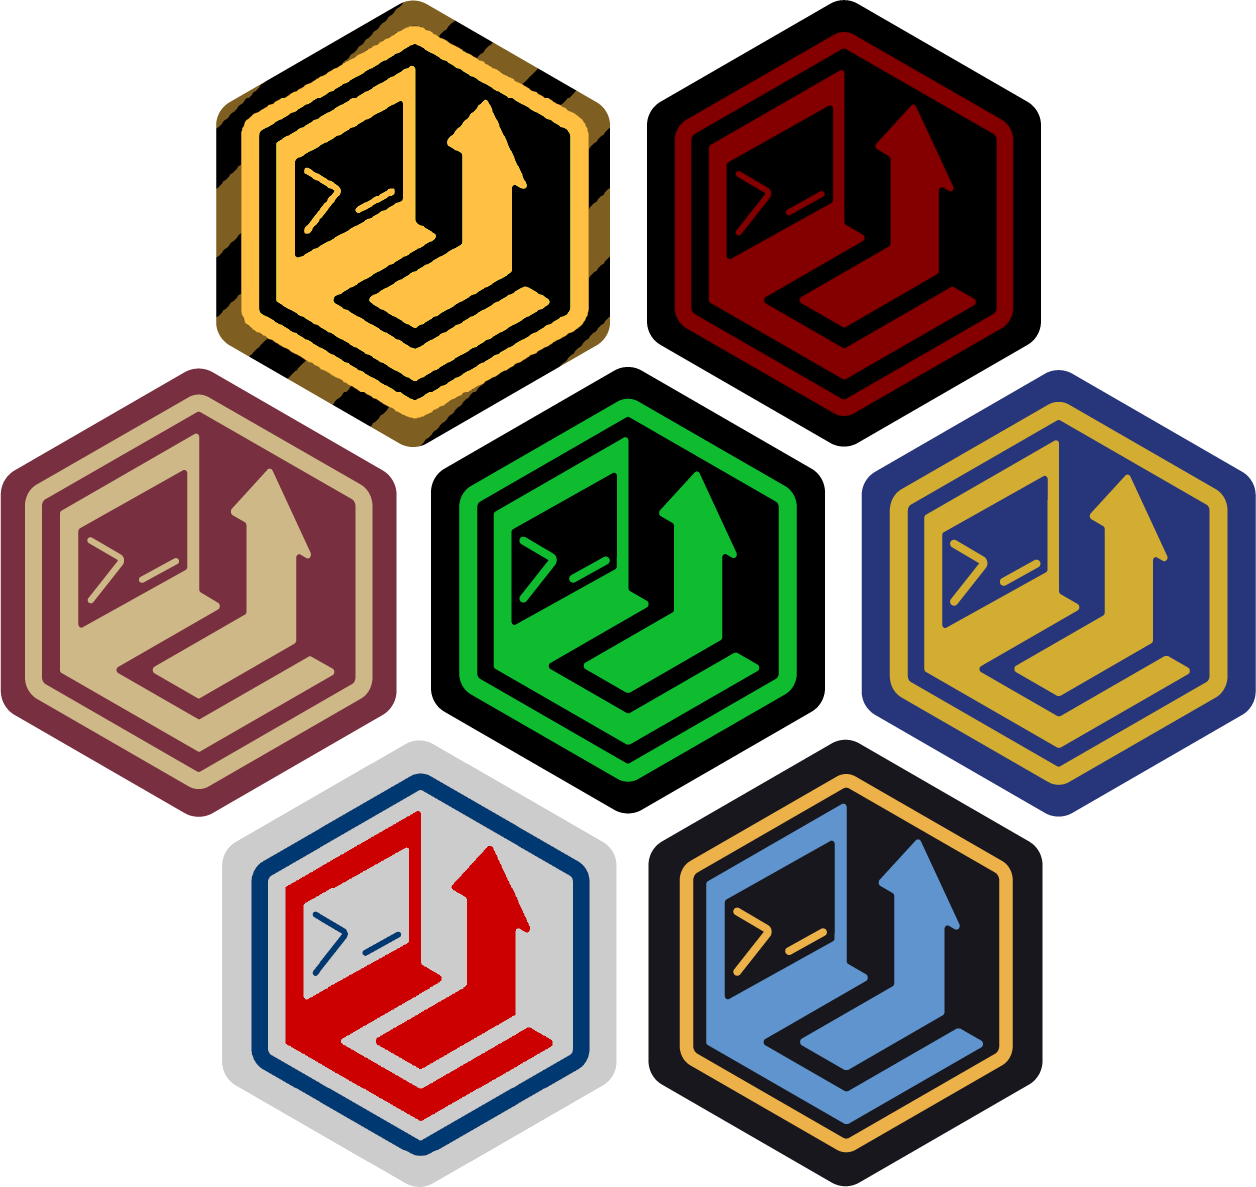 Various DevLUp branch logos arranged in a honeycomb.